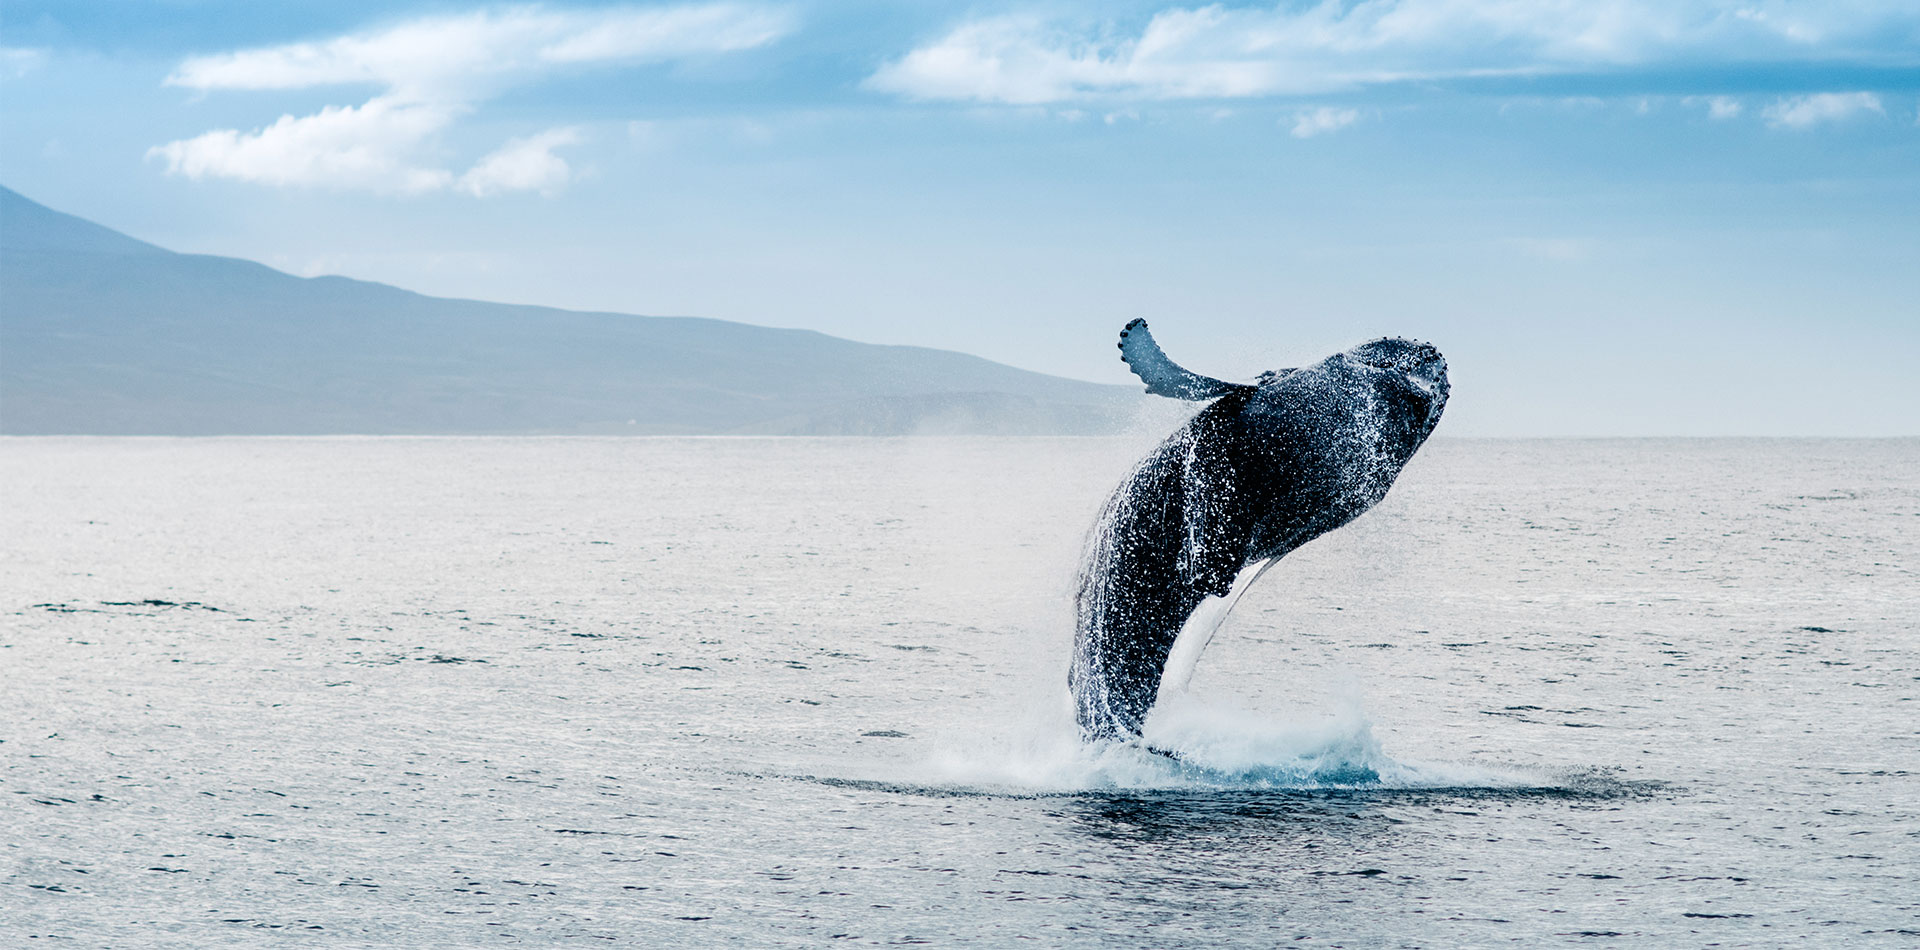 Whale breaching out of the water, Iceland